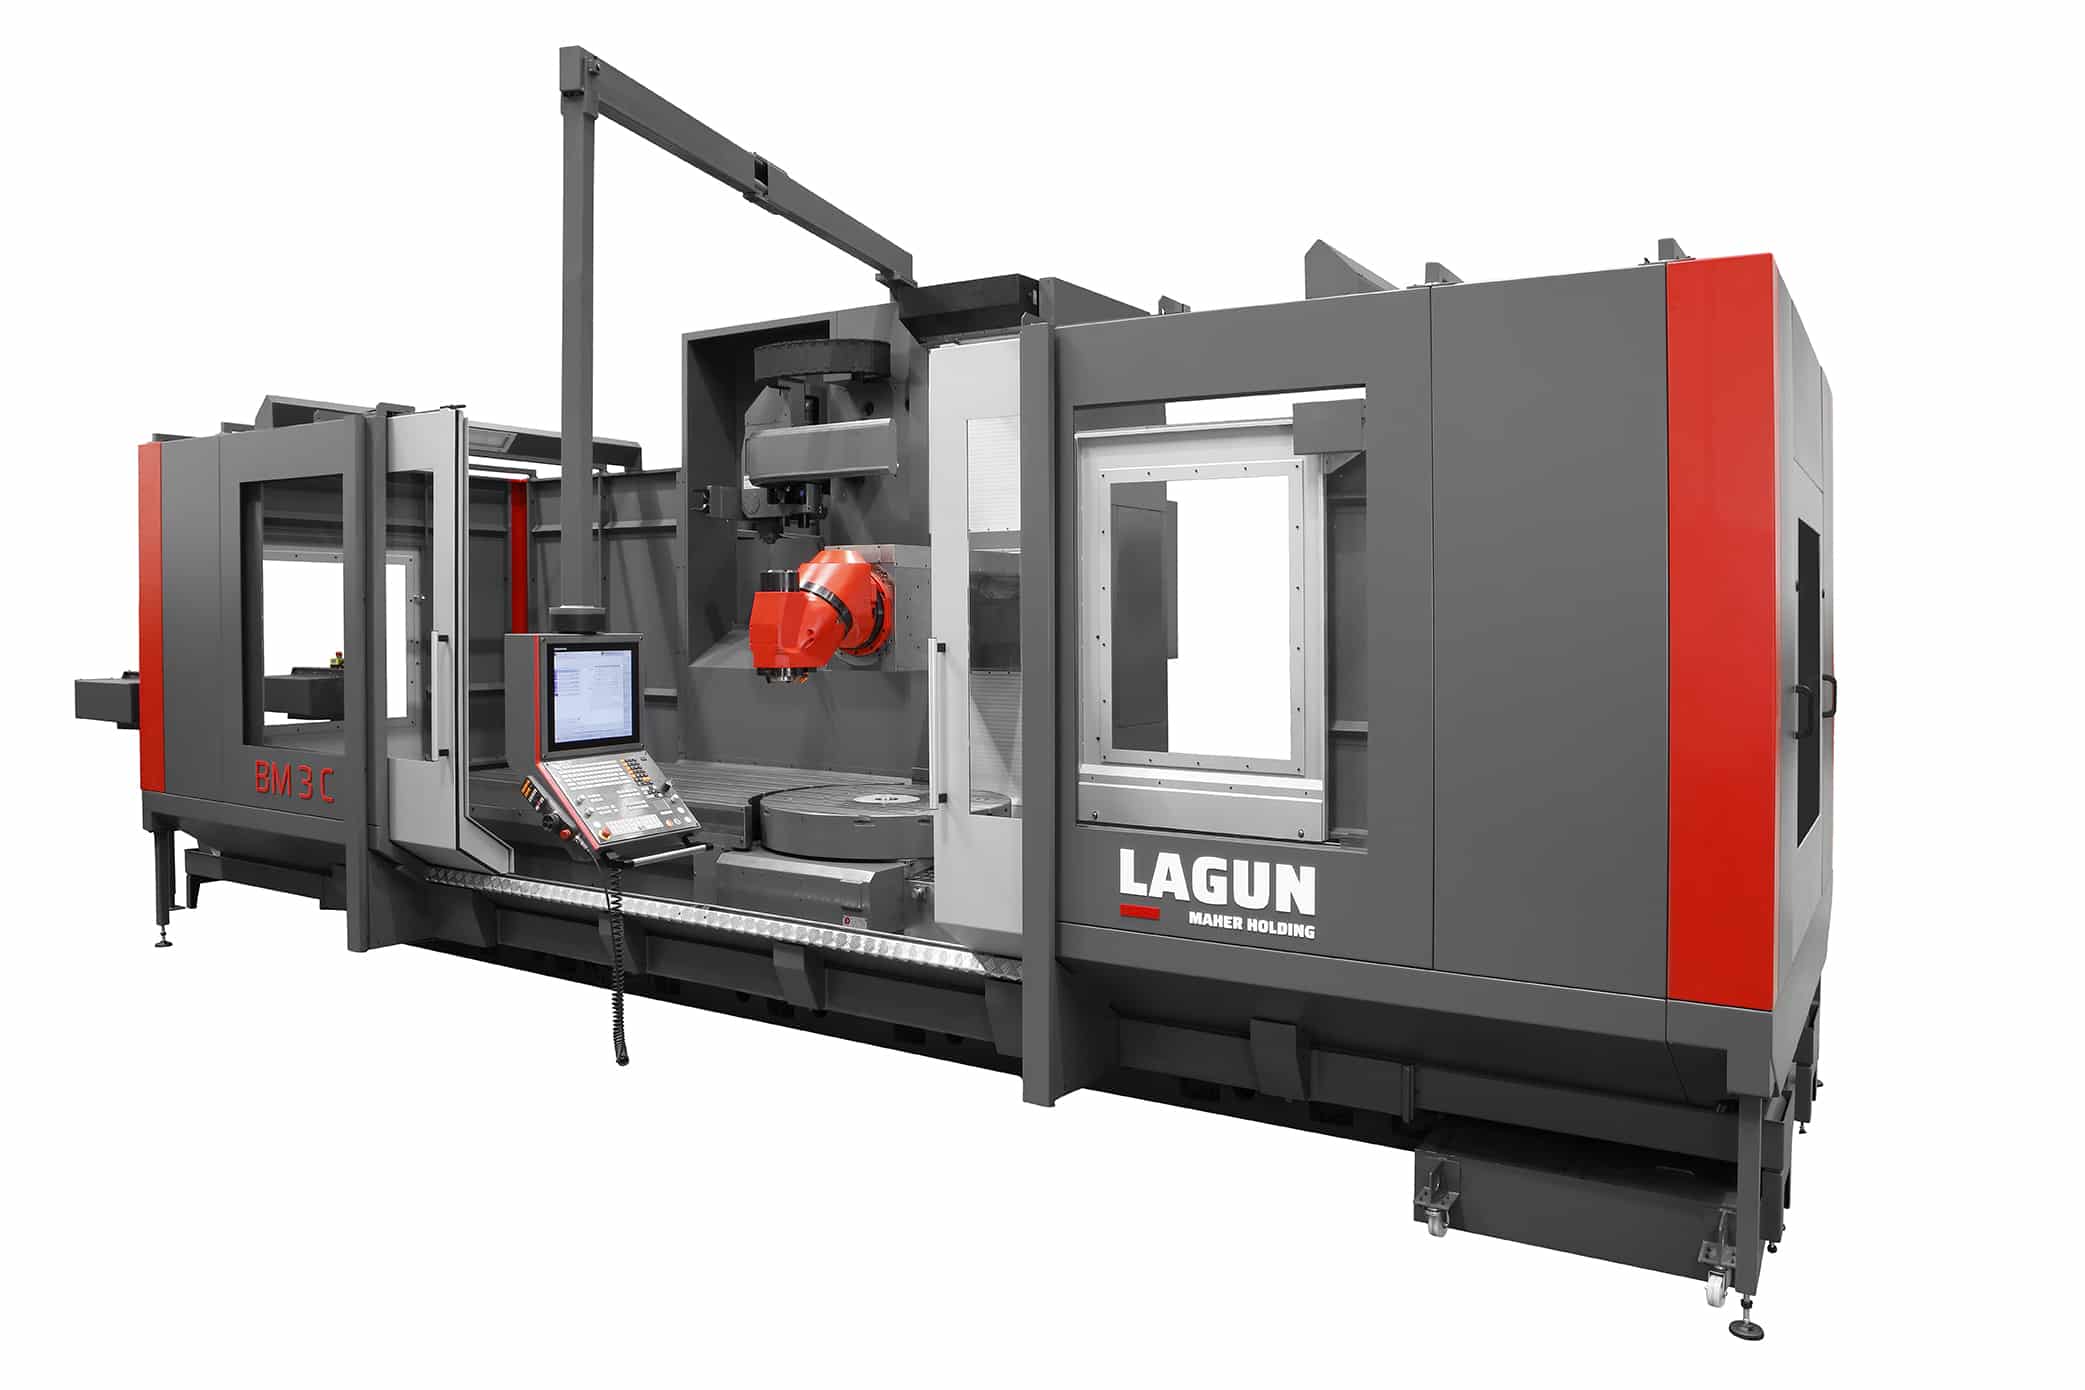 Lagun Model BM-C Milling Machining Center with fixed column and moving table.